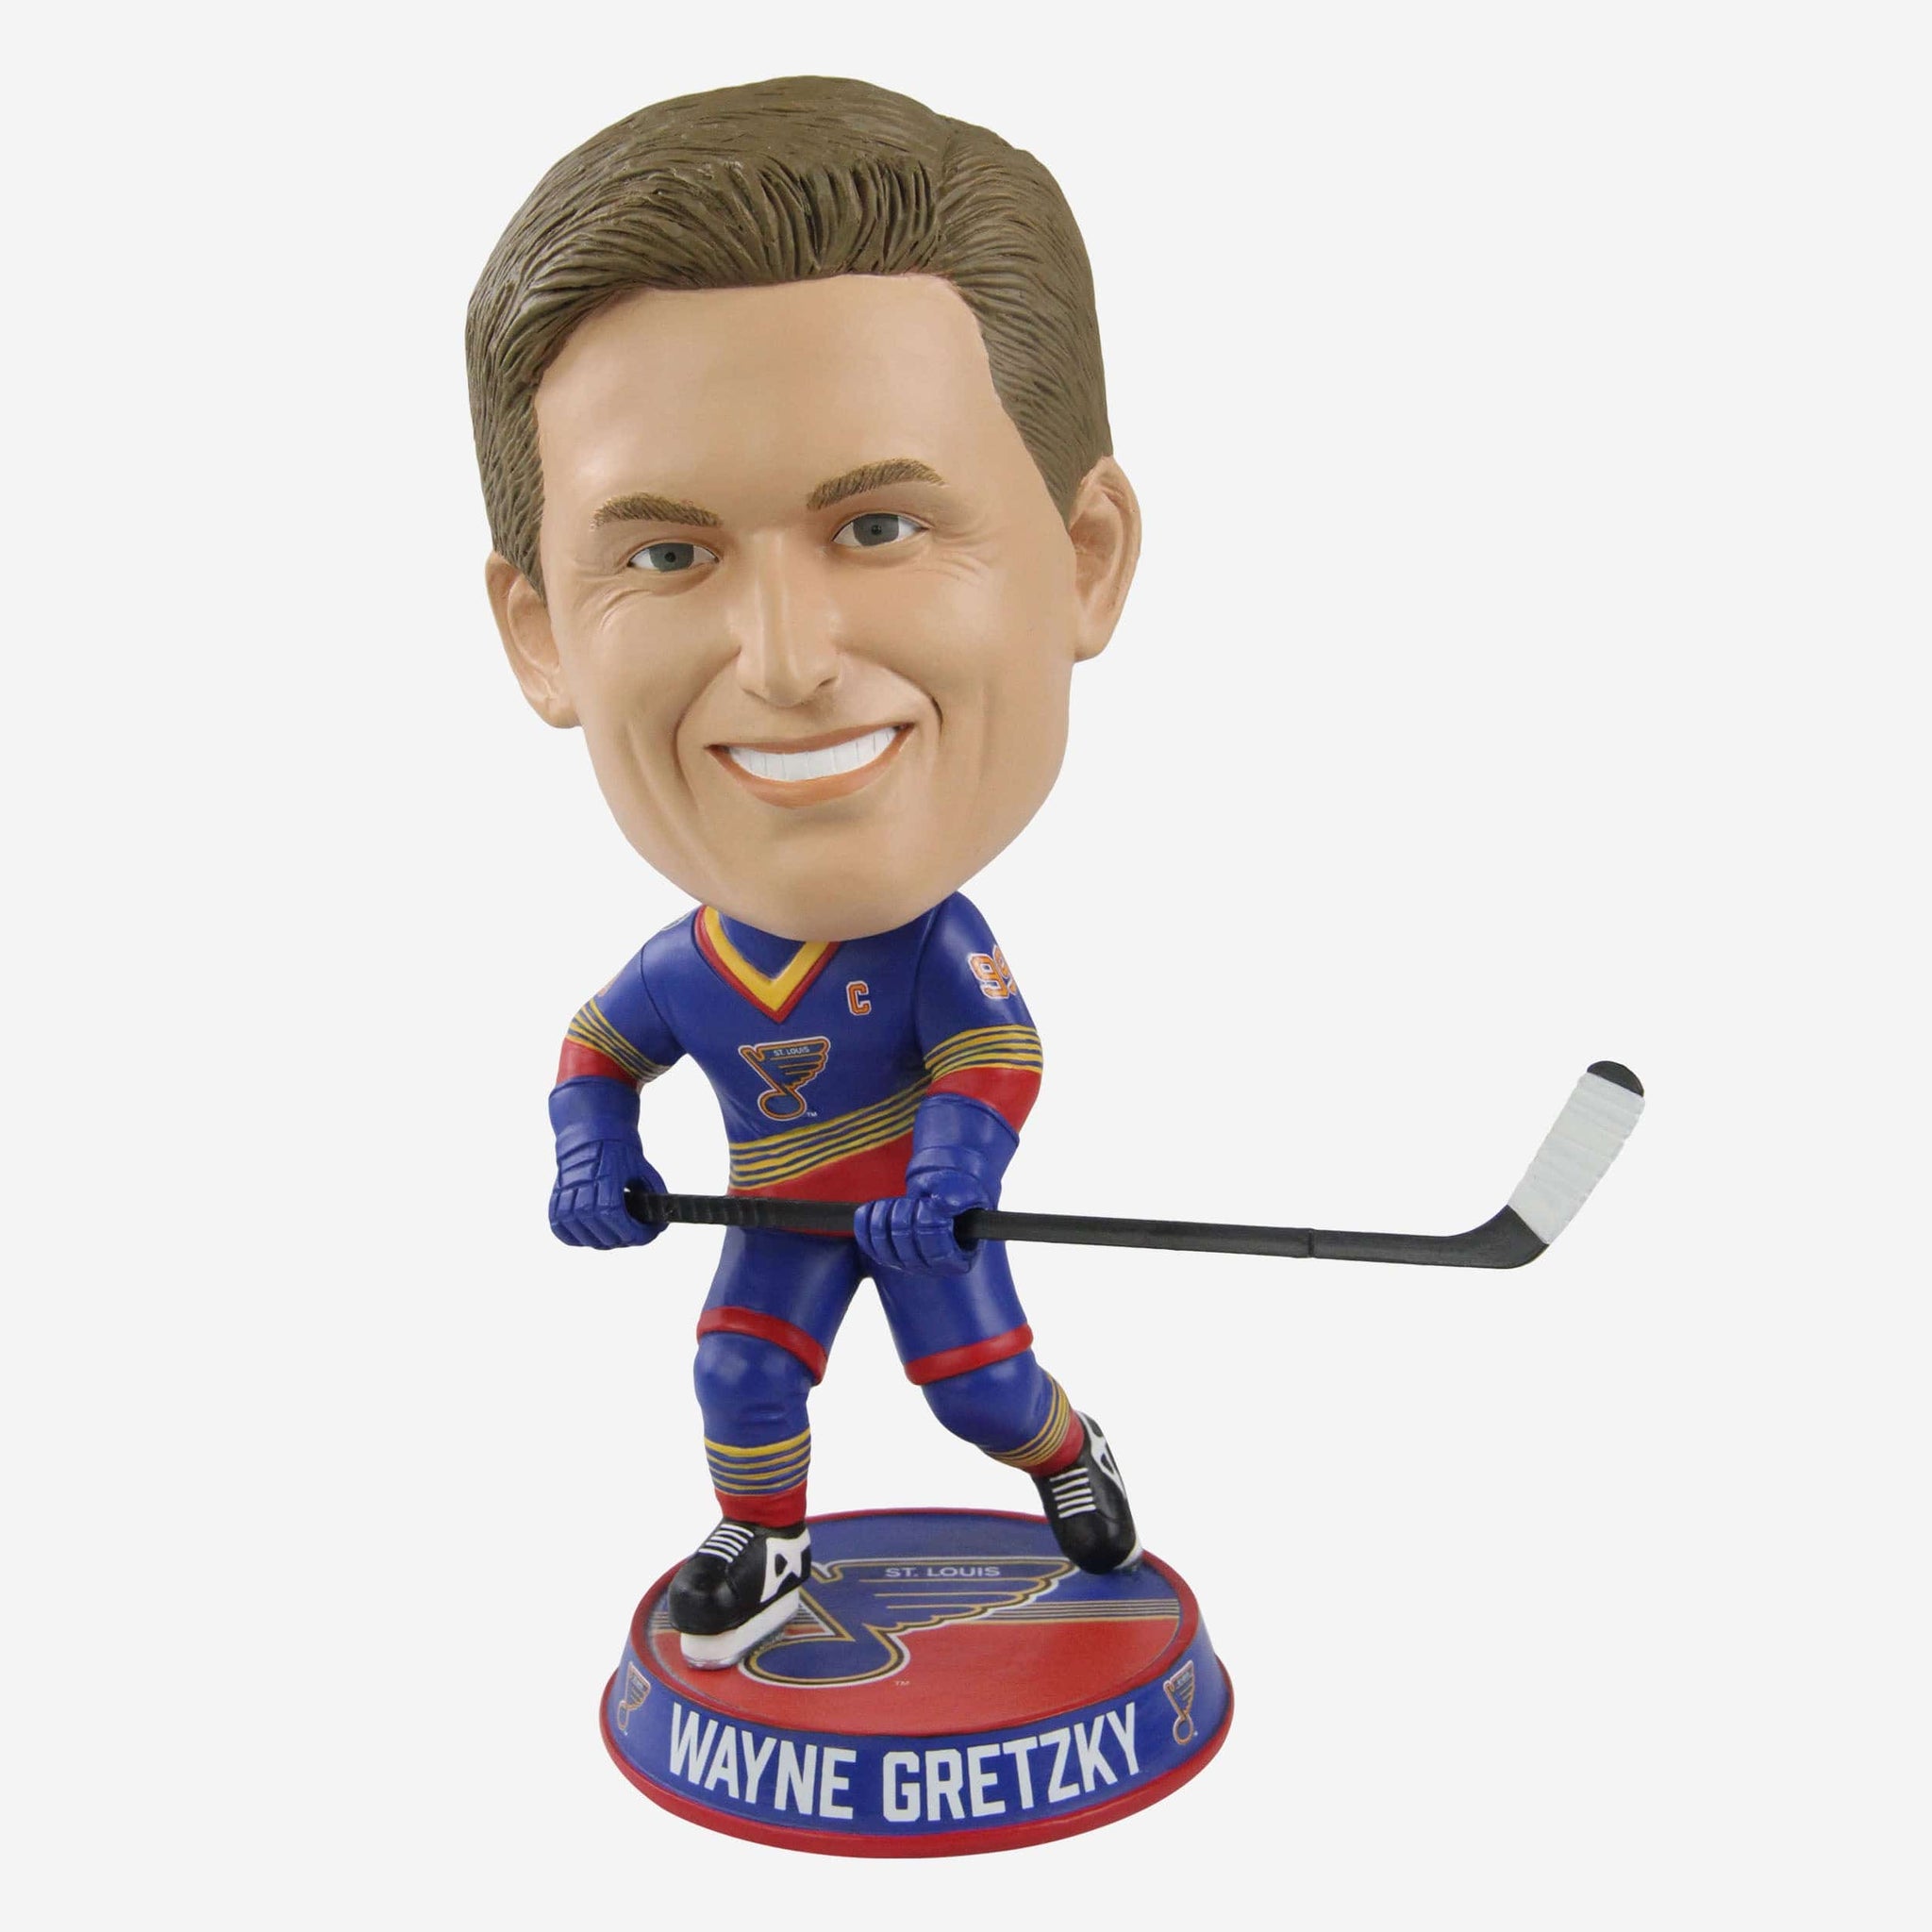 Los Angeles Kings Gift Guide: 10 must-have Wayne Gretzky items